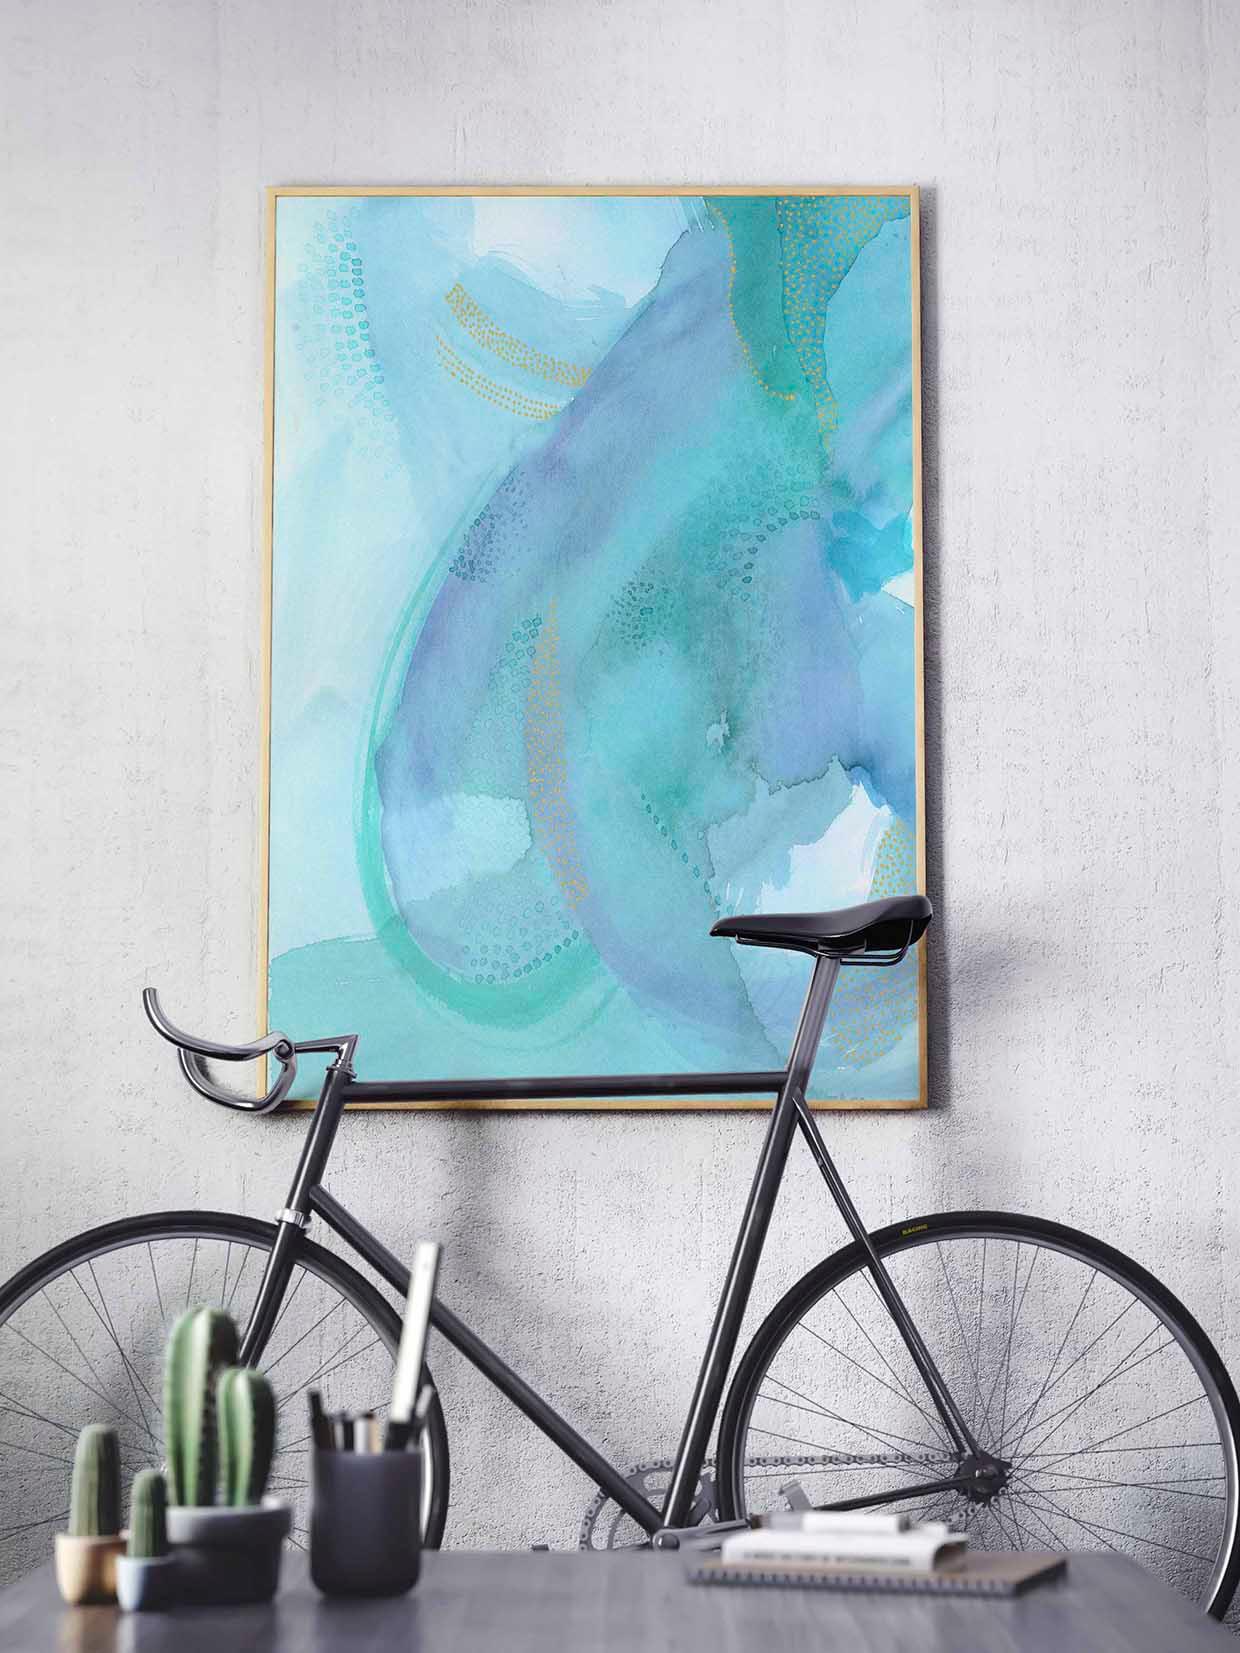 Etherial Abstract Watercolor Art. Blue and Green Colorful Home Decor. - AdriLunaStudio